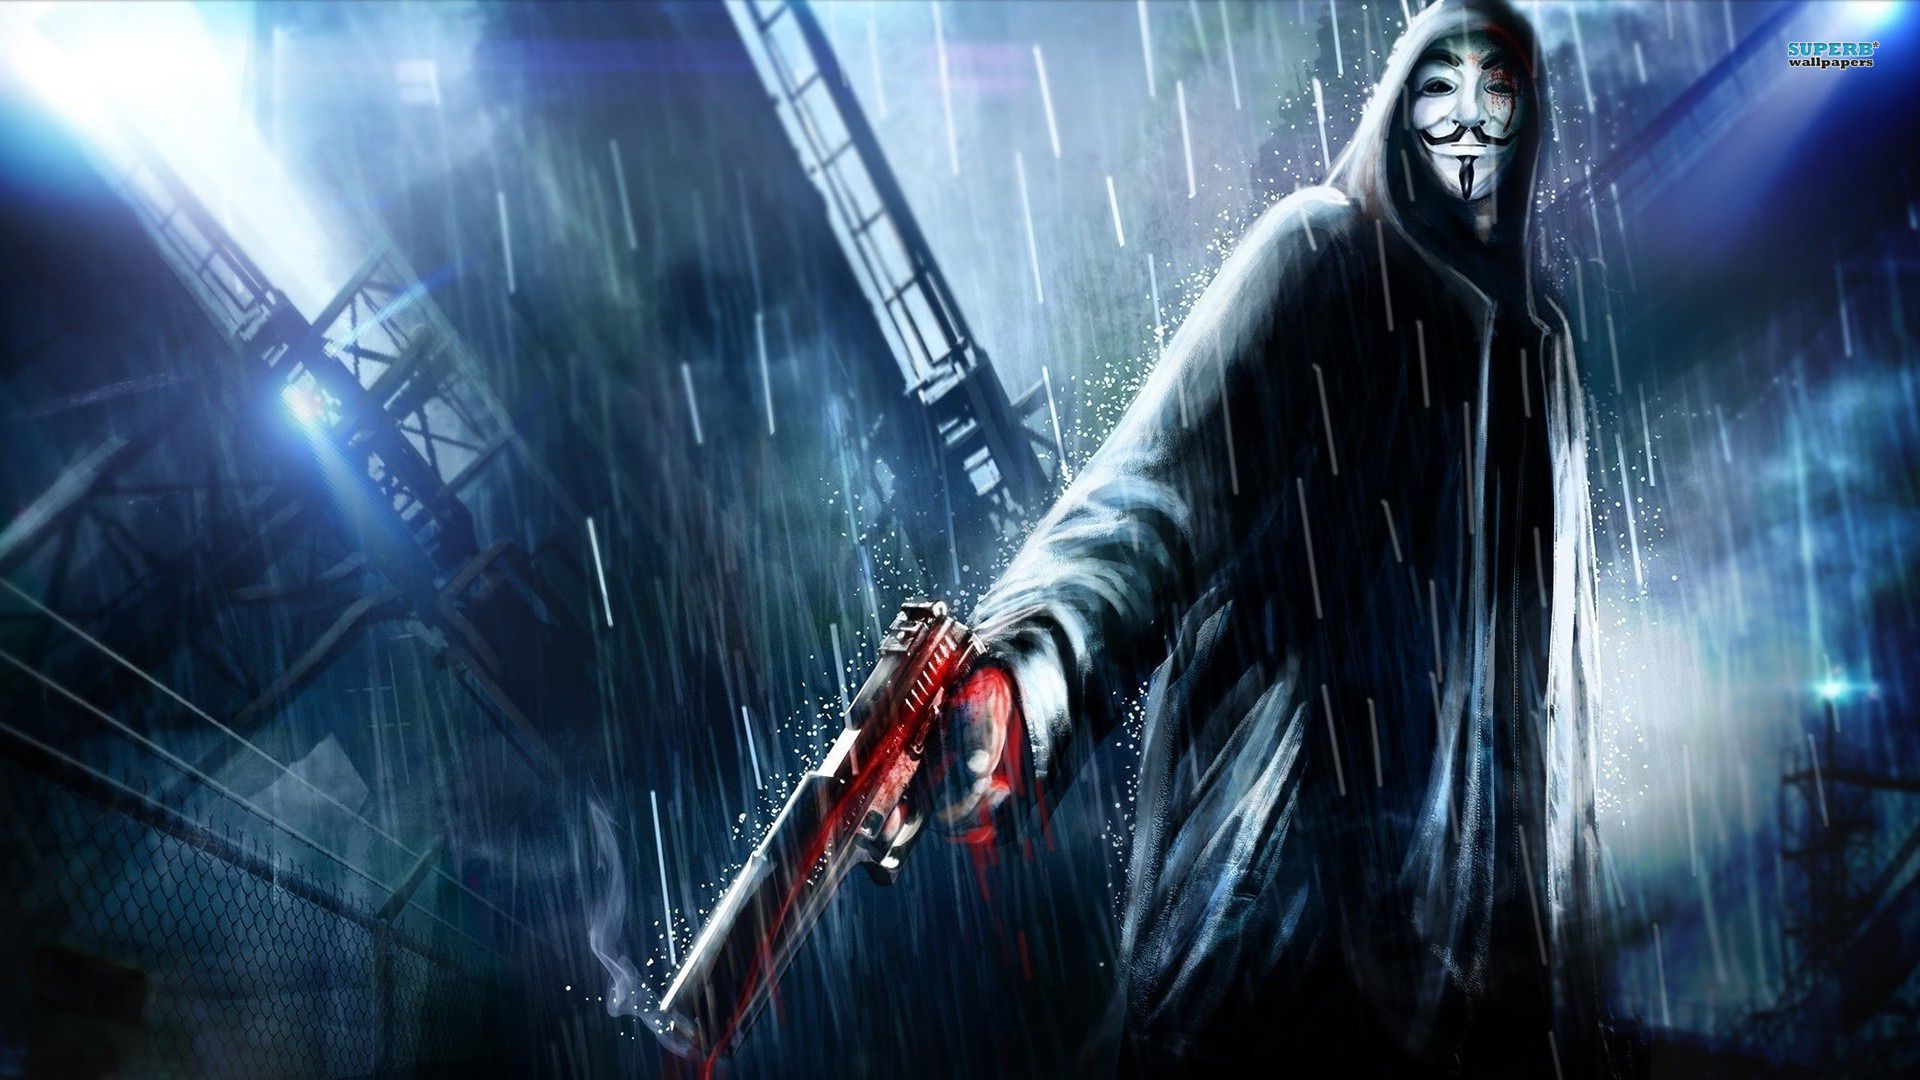 Anonymous wallpaper - Artistic wallpapers -